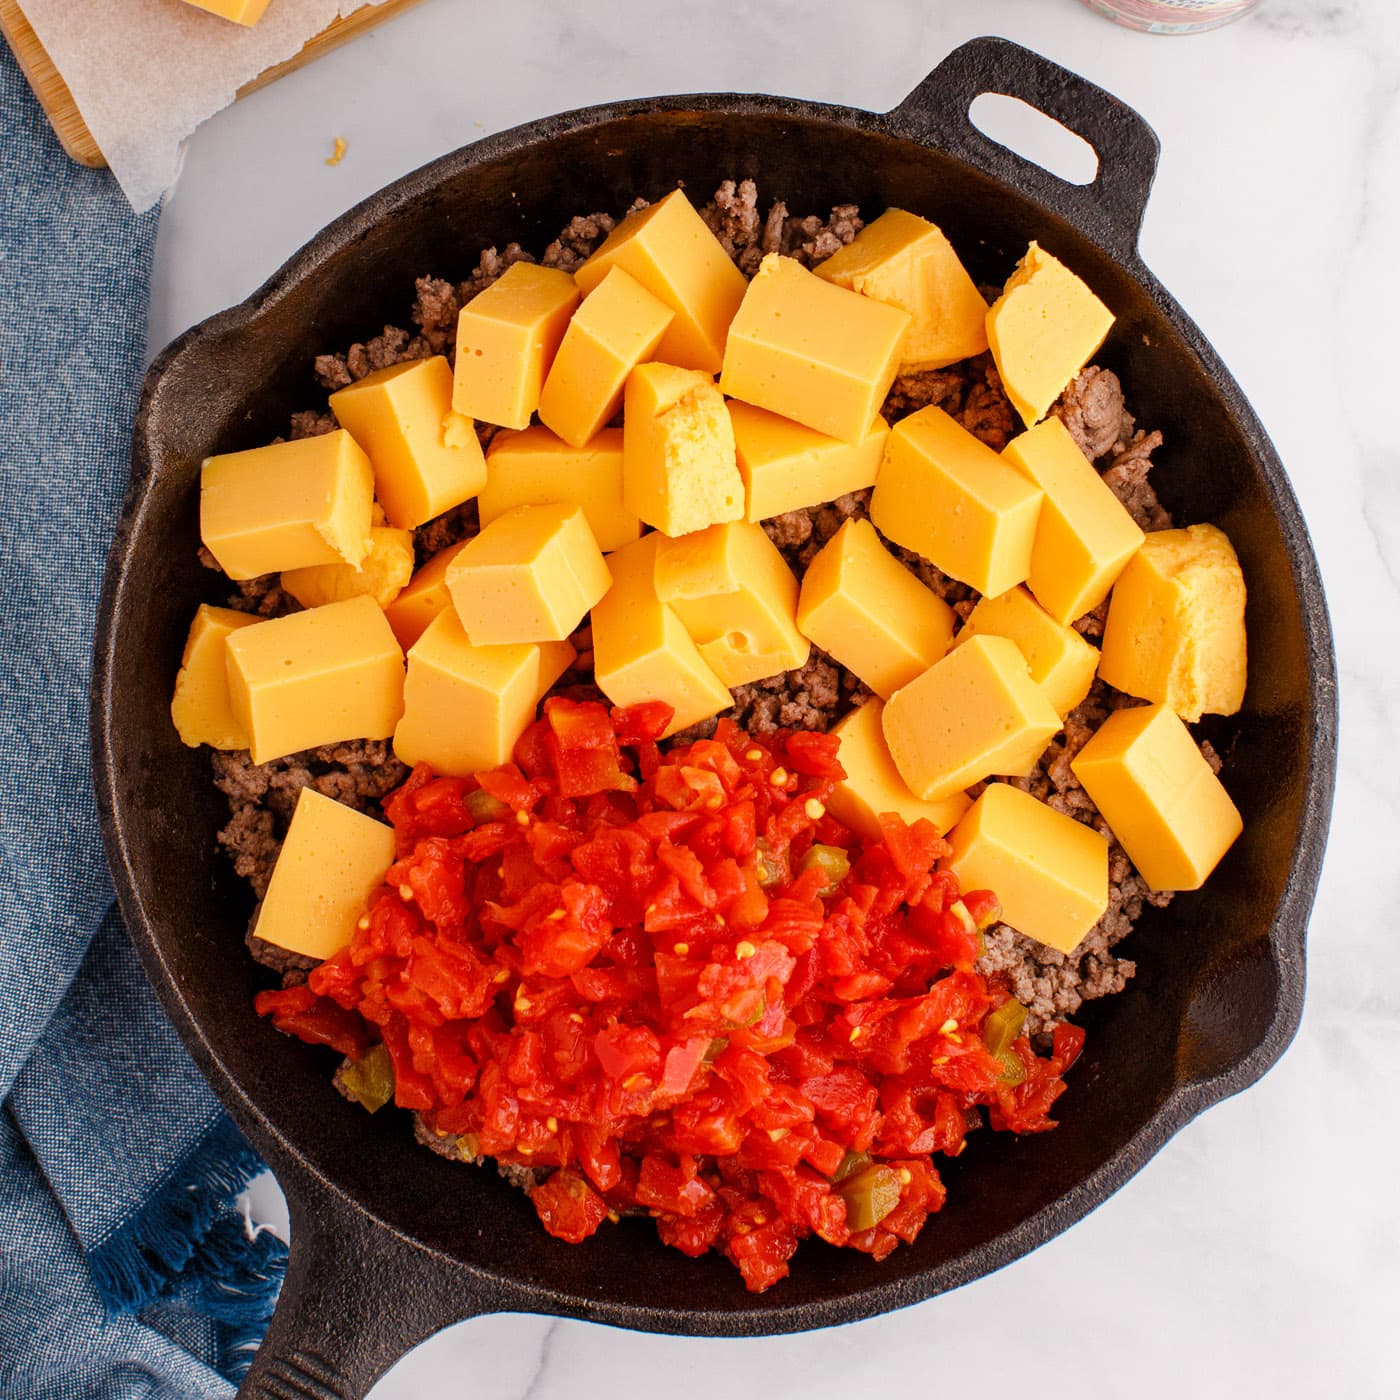 Rotel tomatoes, Velveeta cheese, and ground beef dip in a skillet